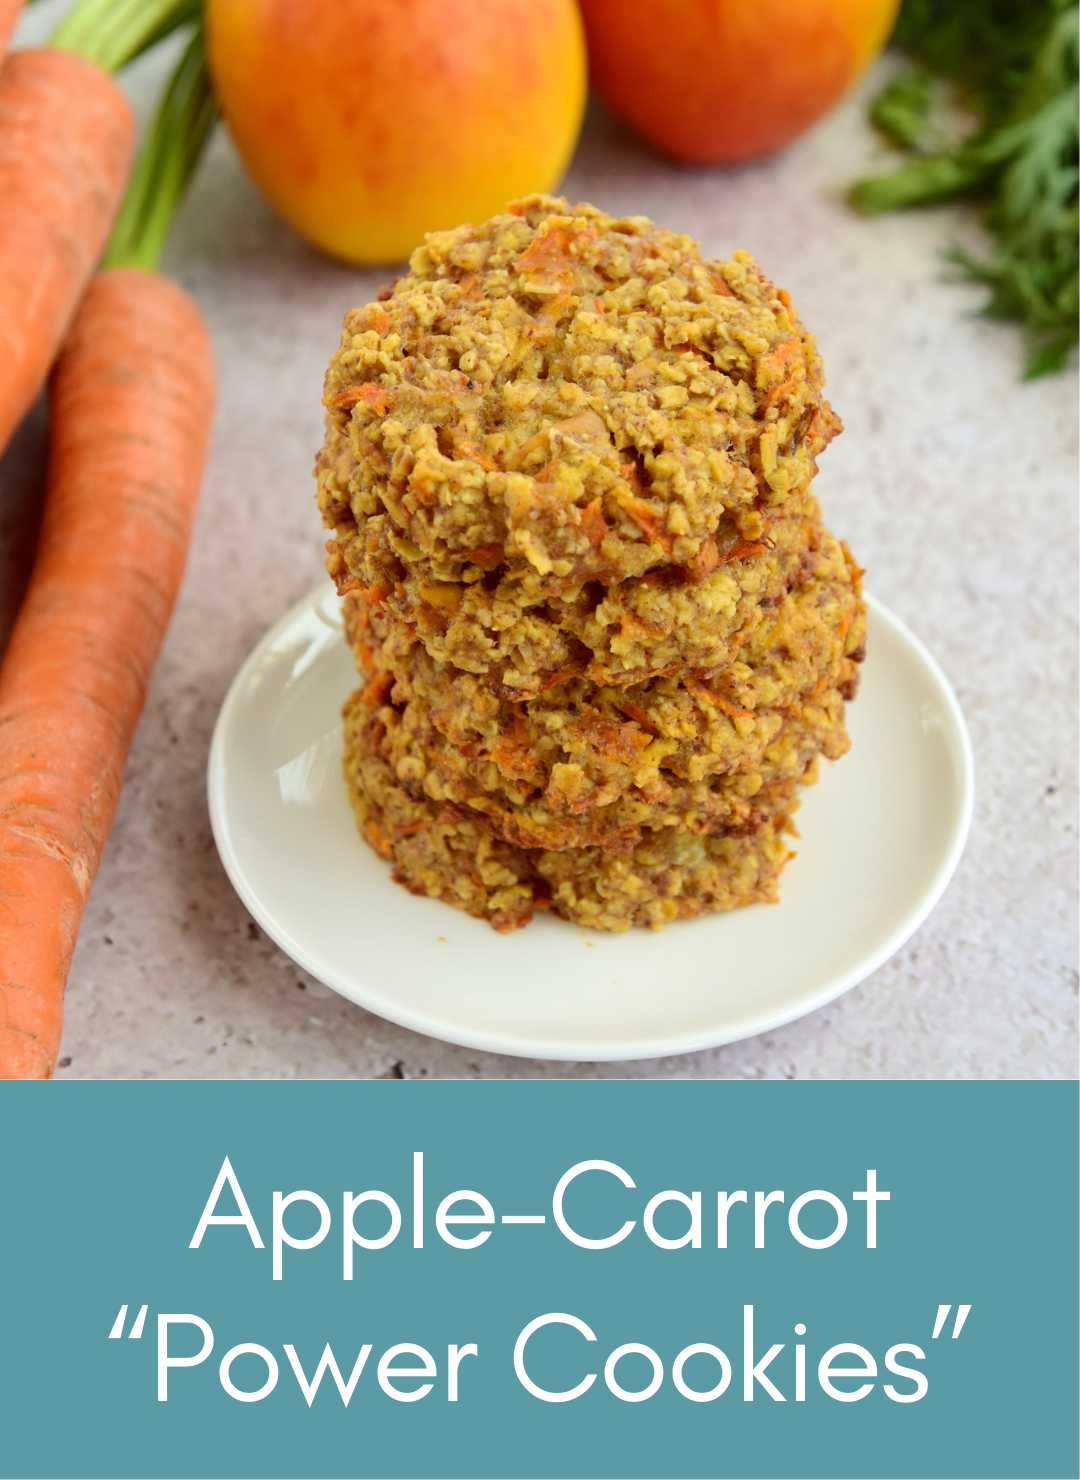 Apple-carrot power cookies Picture with link to recipe